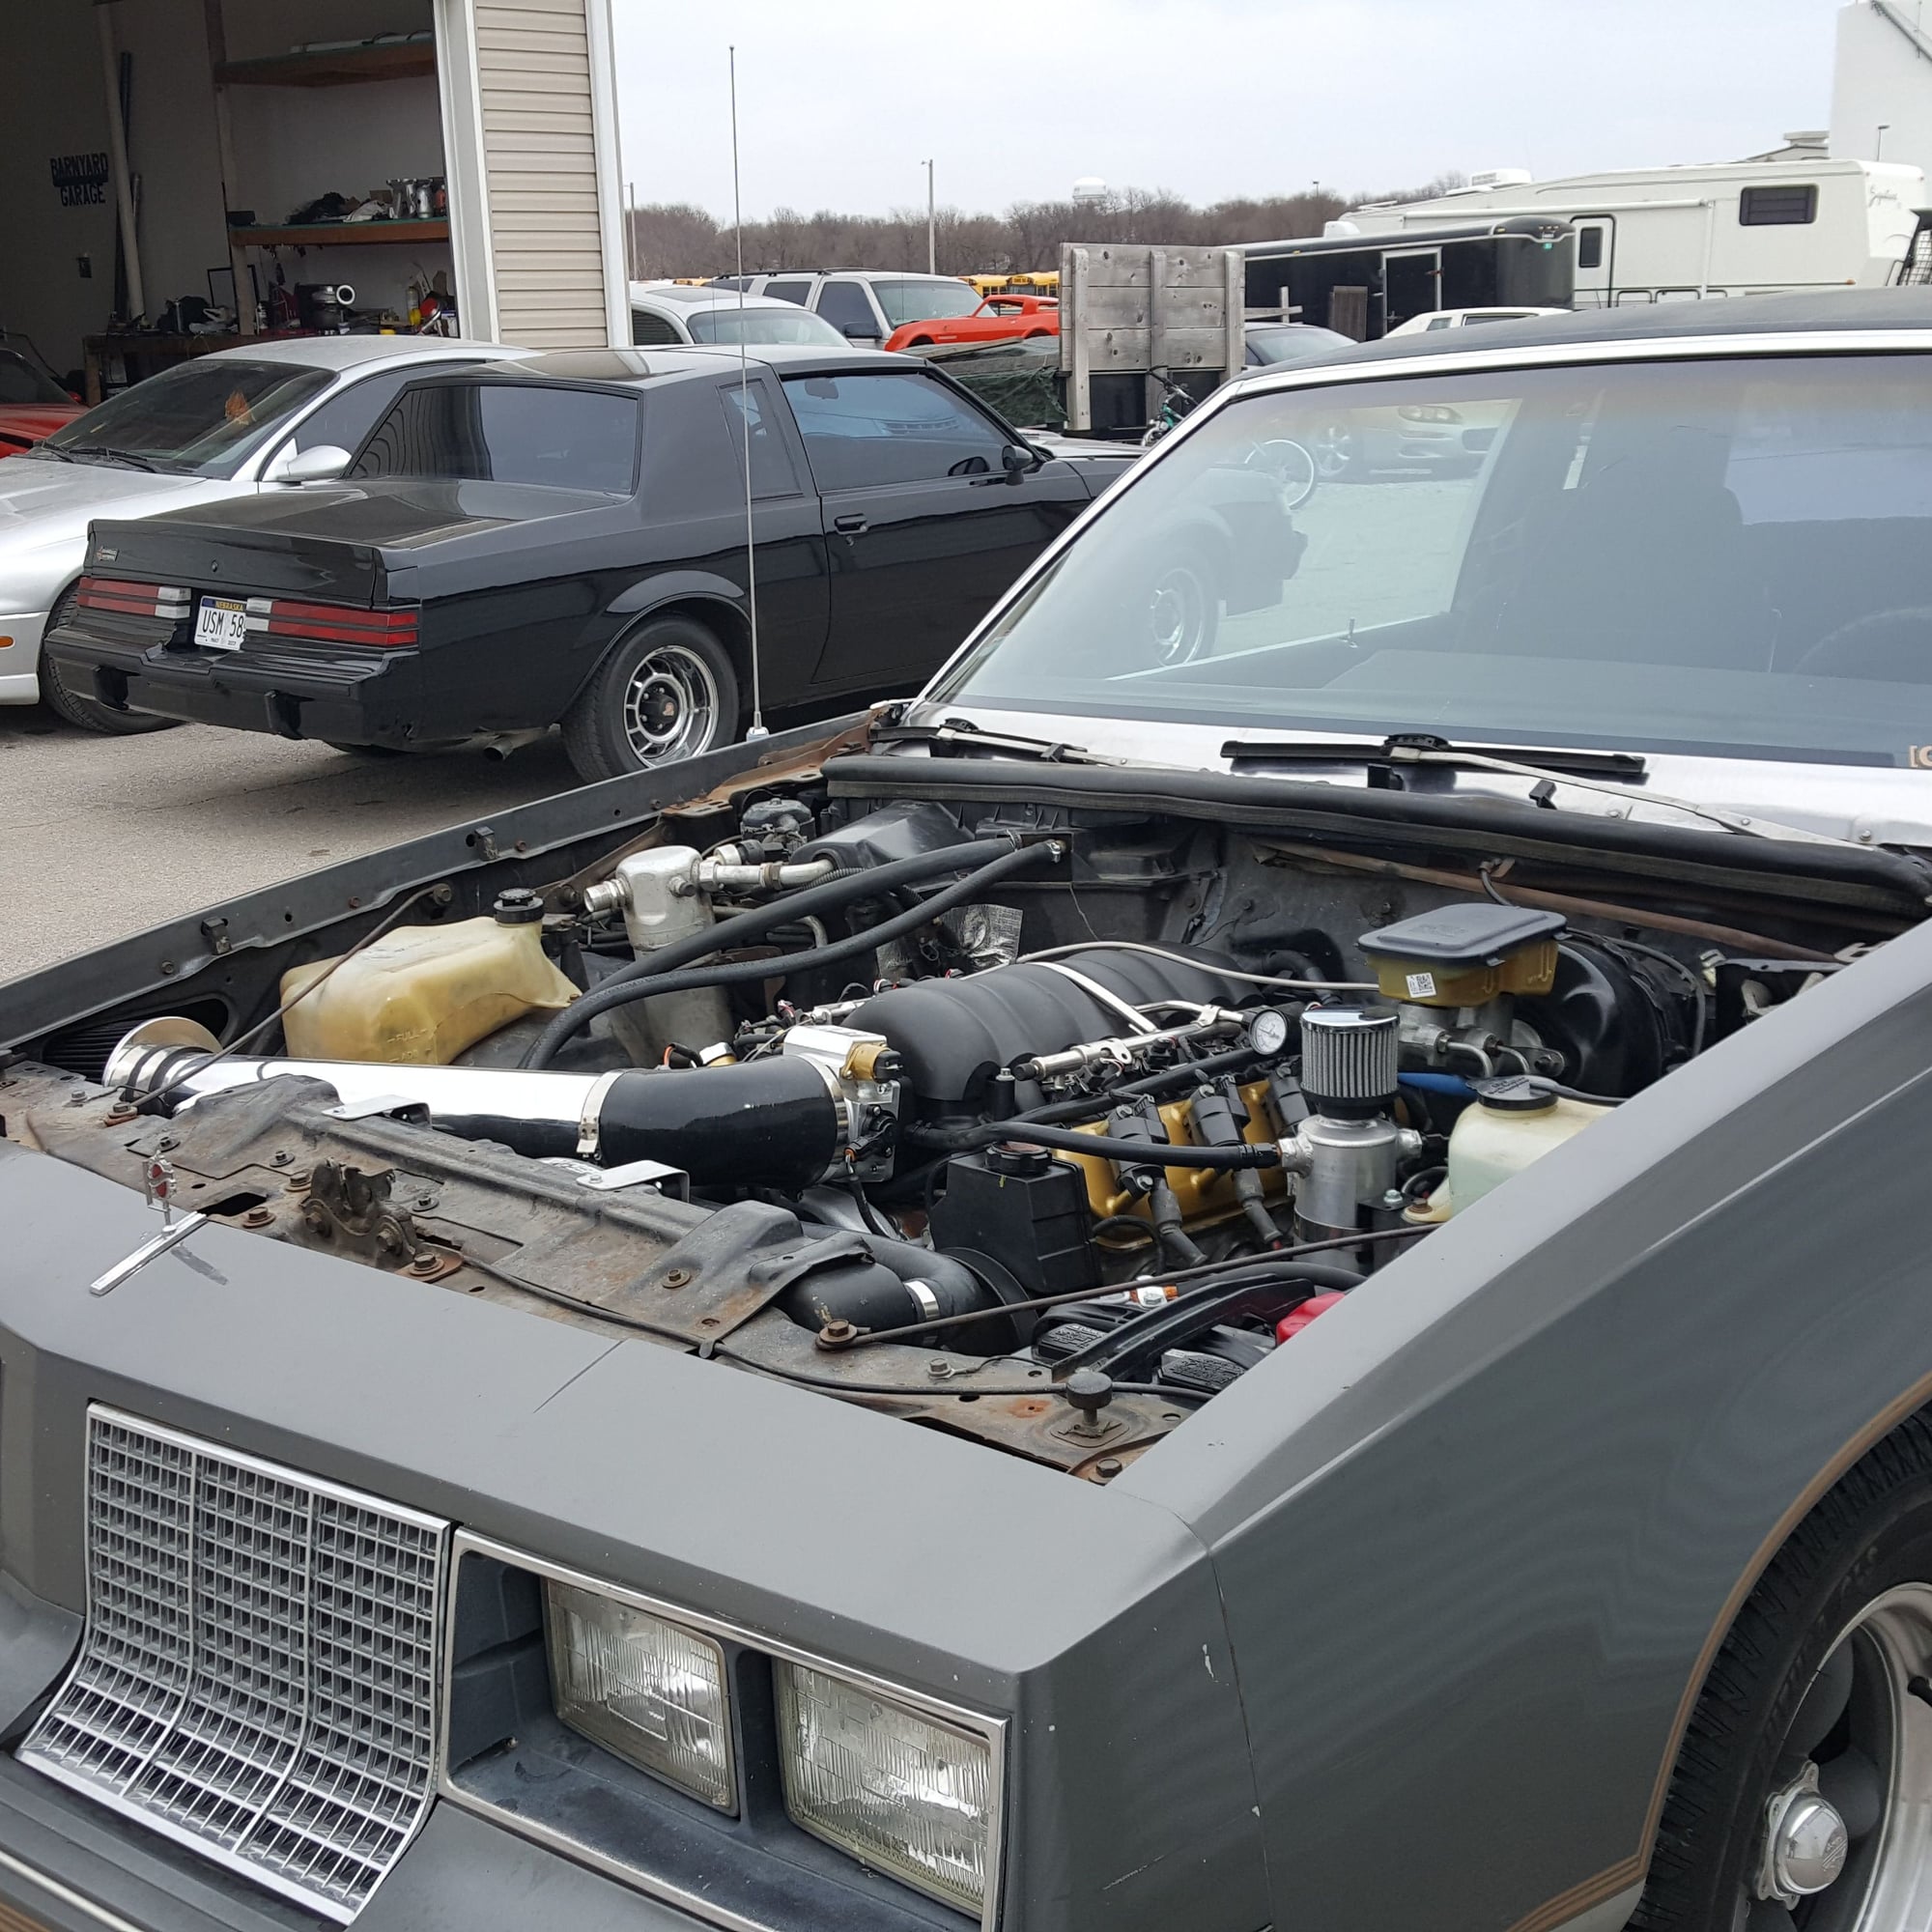 1985 Oldsmobile Cutlass Salon - Delete, keeping it for the time being. - Used - VIN 1fapb986lawo56bvx - 8 cyl - 2WD - Manual - Coupe - Gray - Lincoln, NE 68503, United States